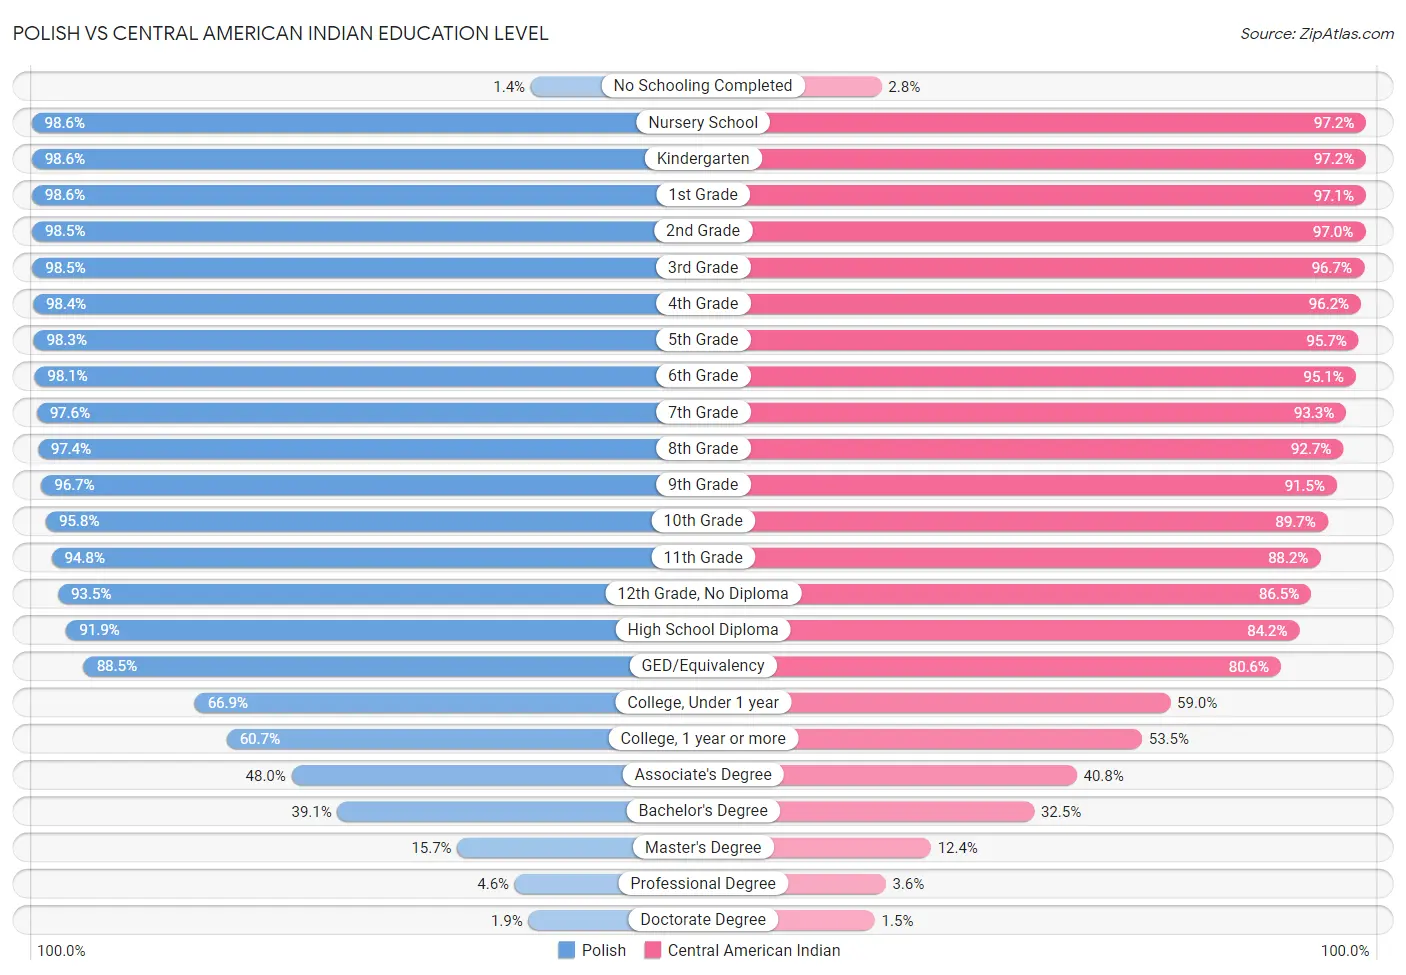 Polish vs Central American Indian Education Level